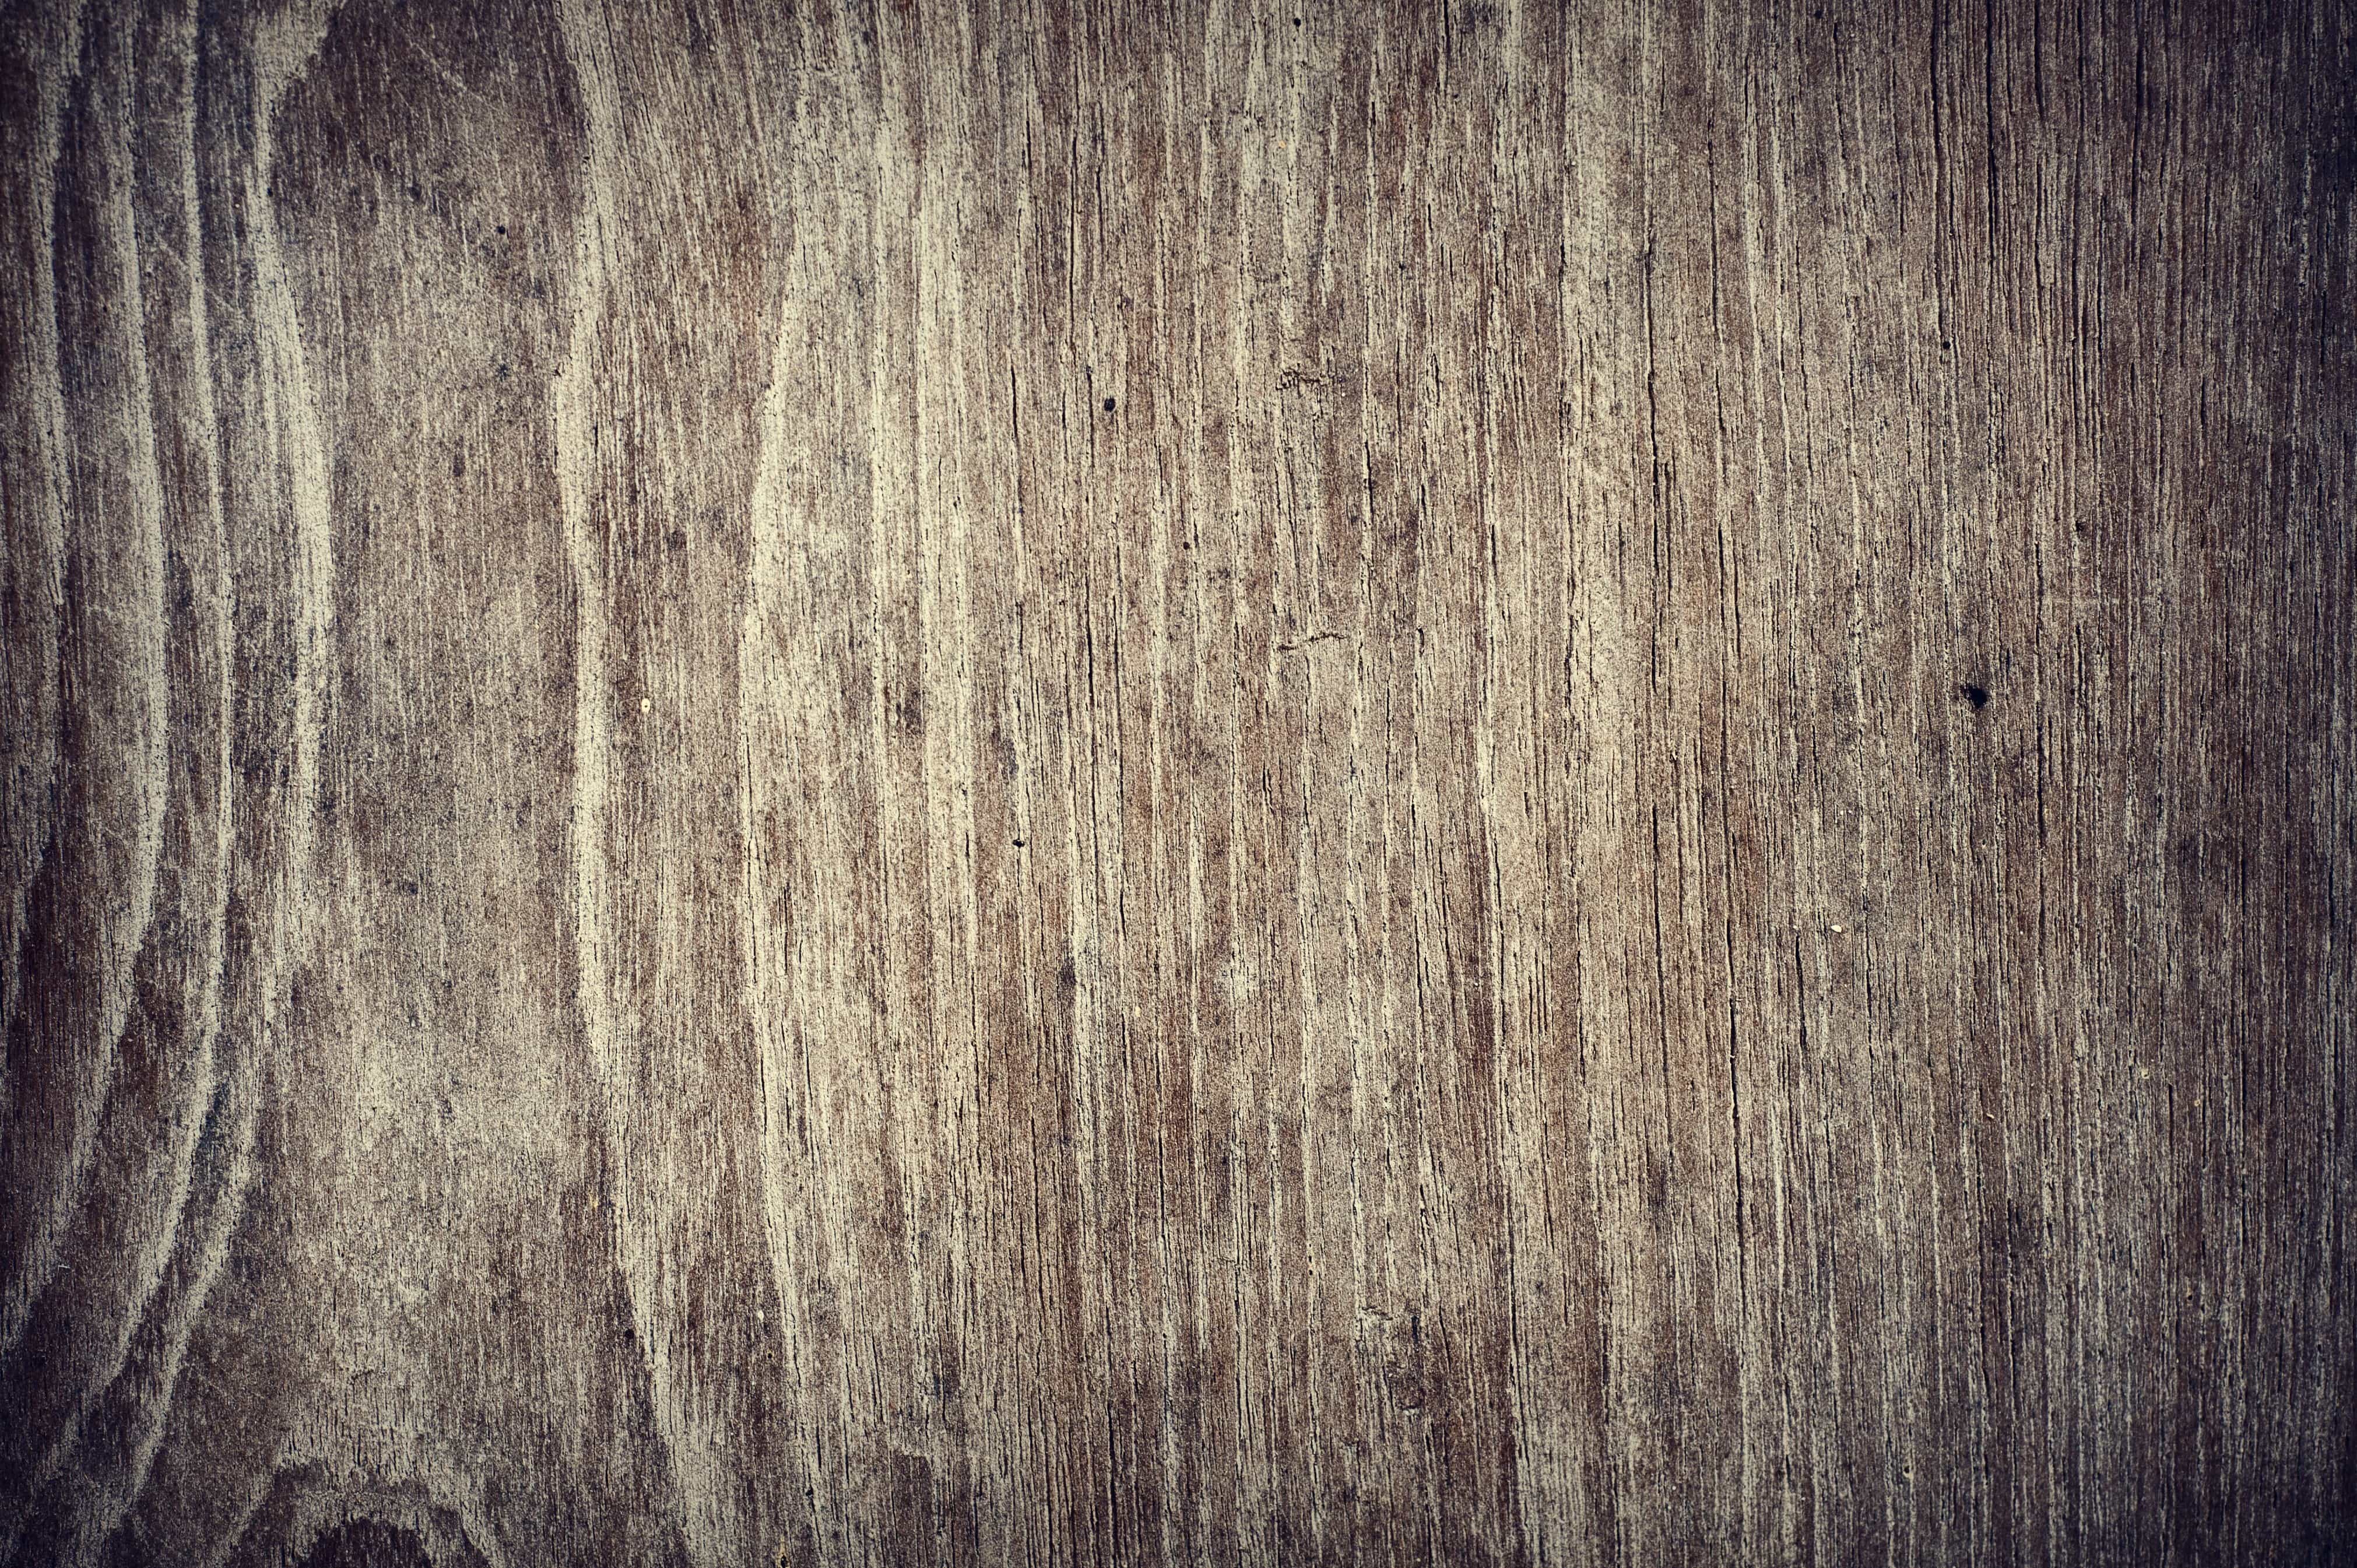 Free picture surface design texture wood pattern old 